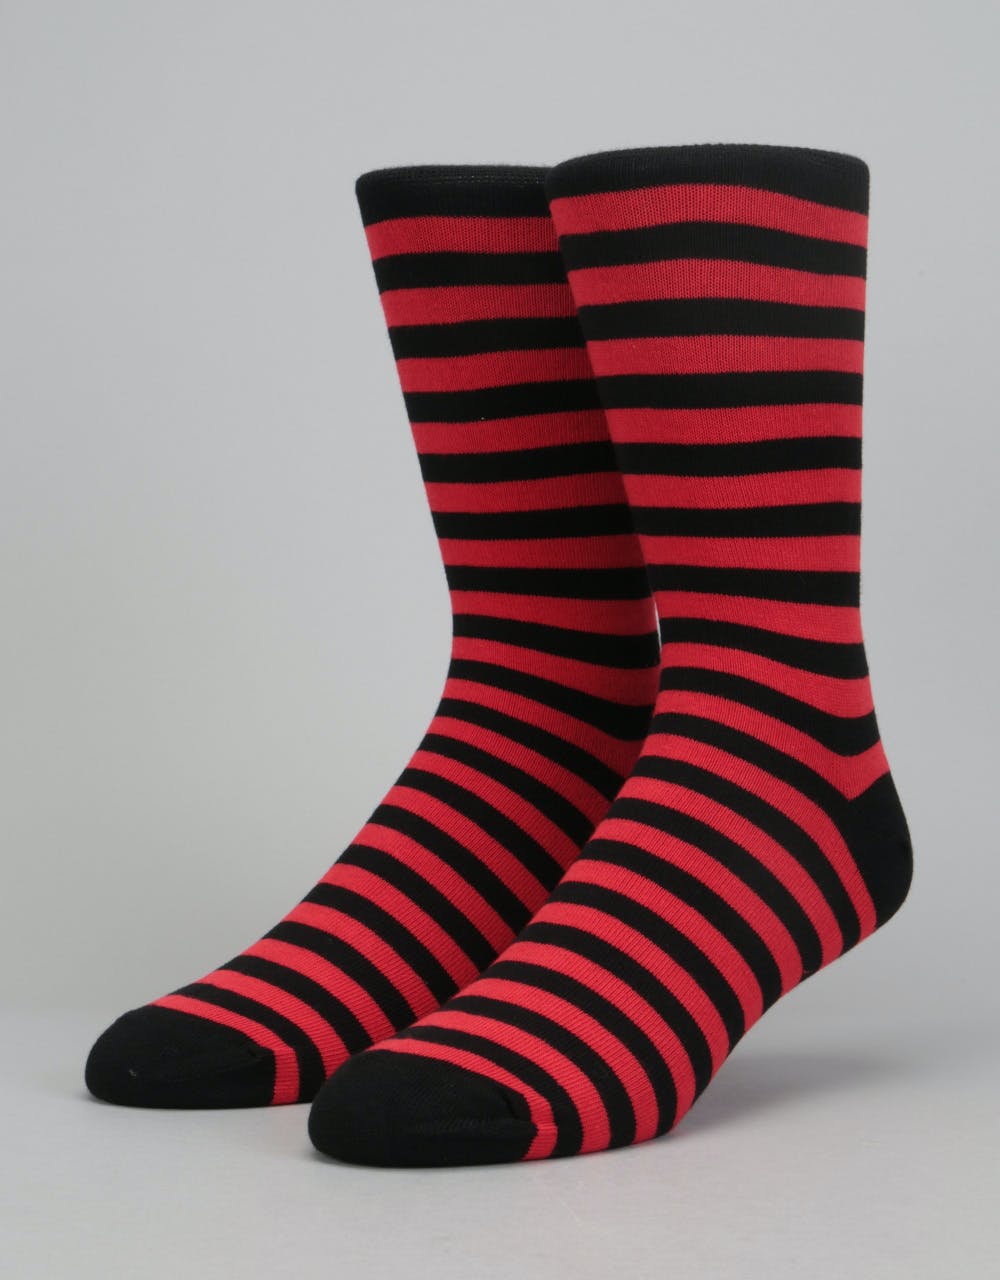 Route One Striped Socks - Black/Red